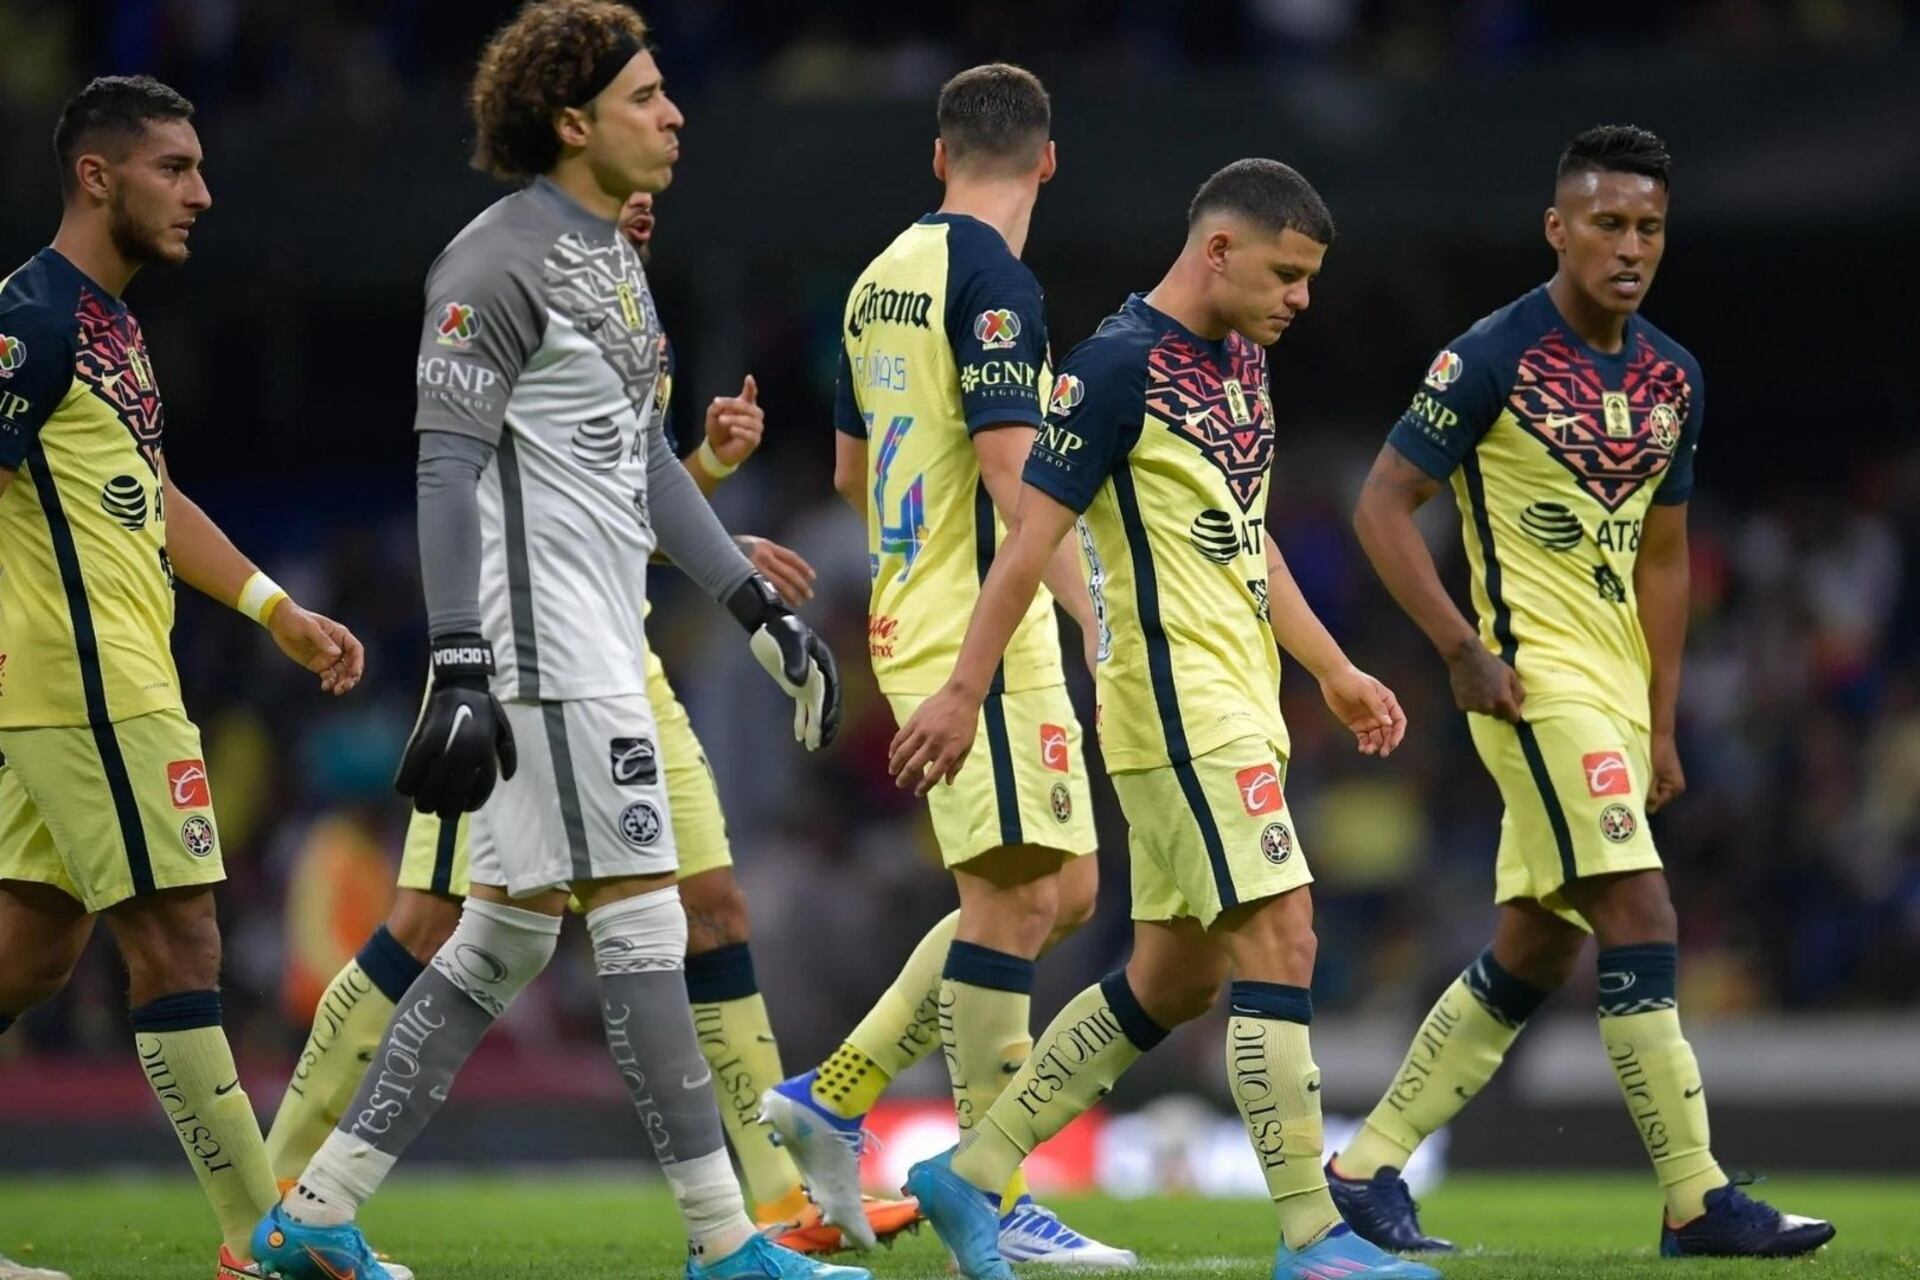 Now that he lost his place in Club América’s lineup, he’s asking to leave Las Águilas